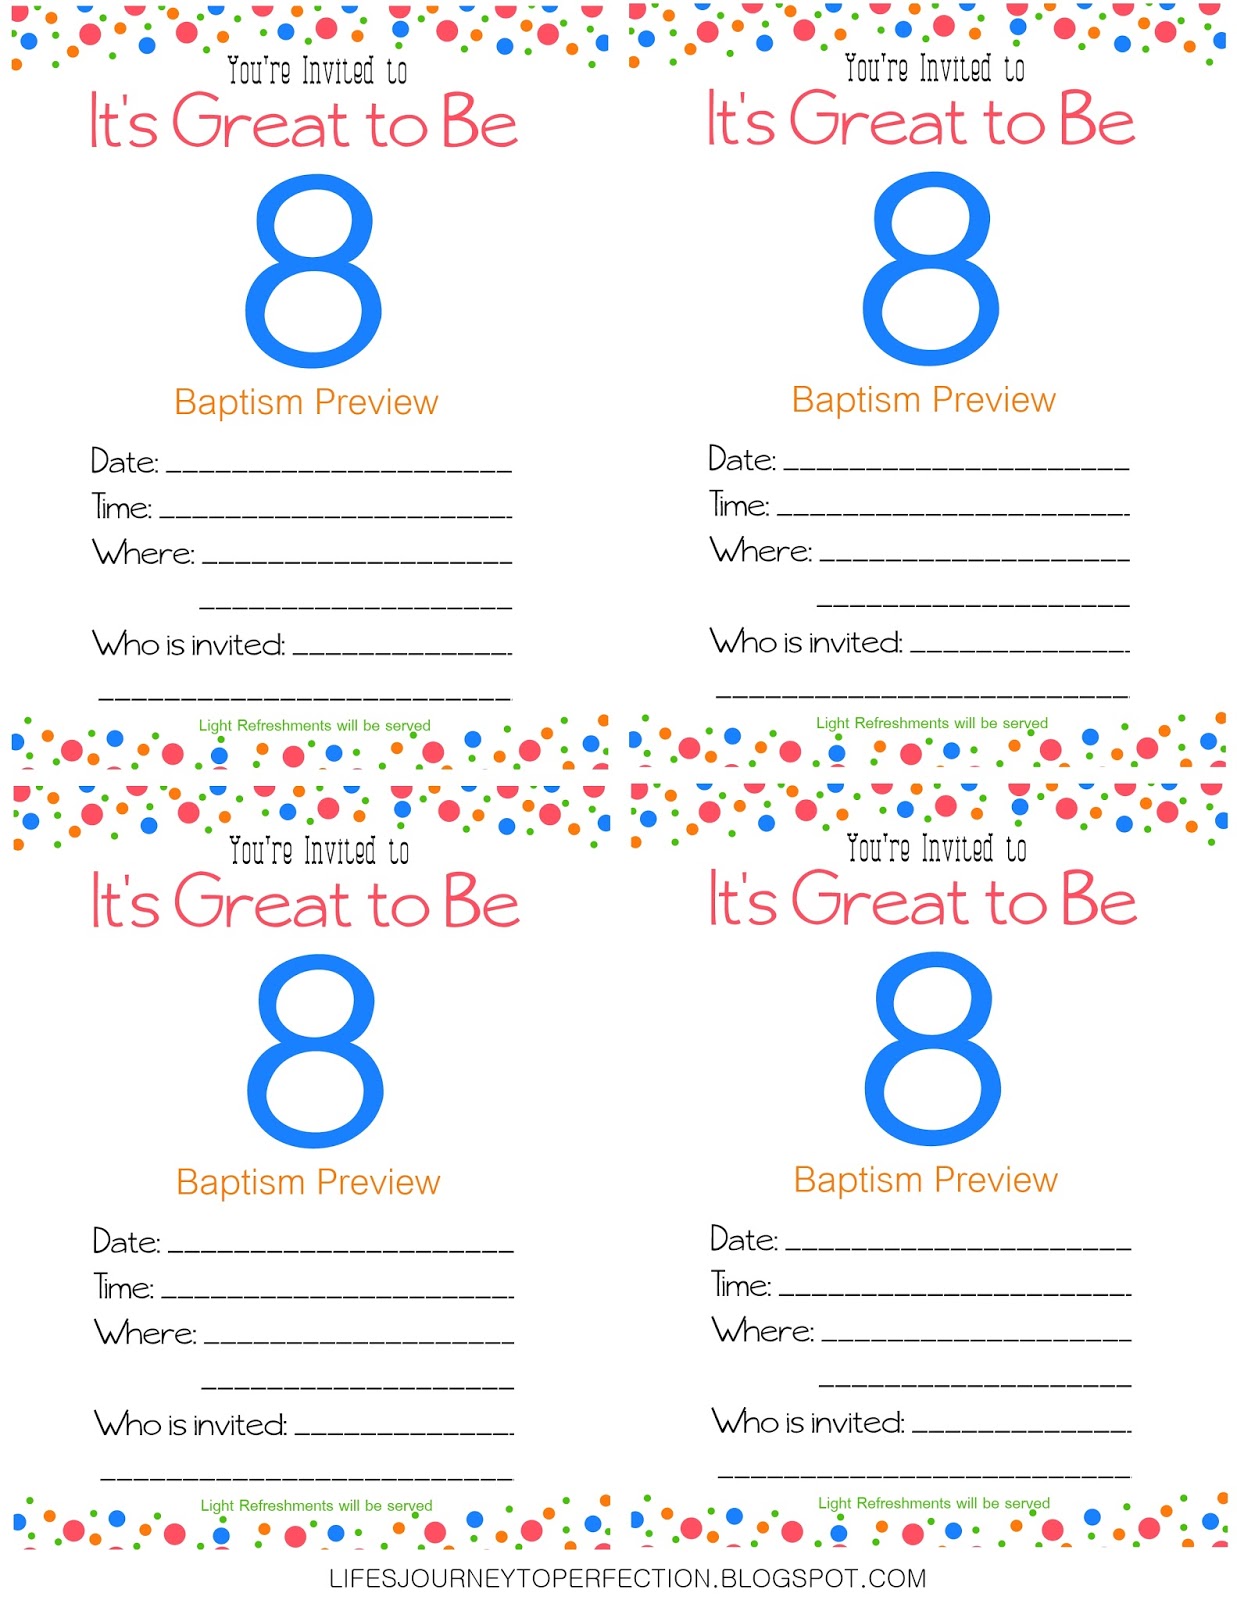 life-s-journey-to-perfection-great-to-be-eight-ideas-and-printables